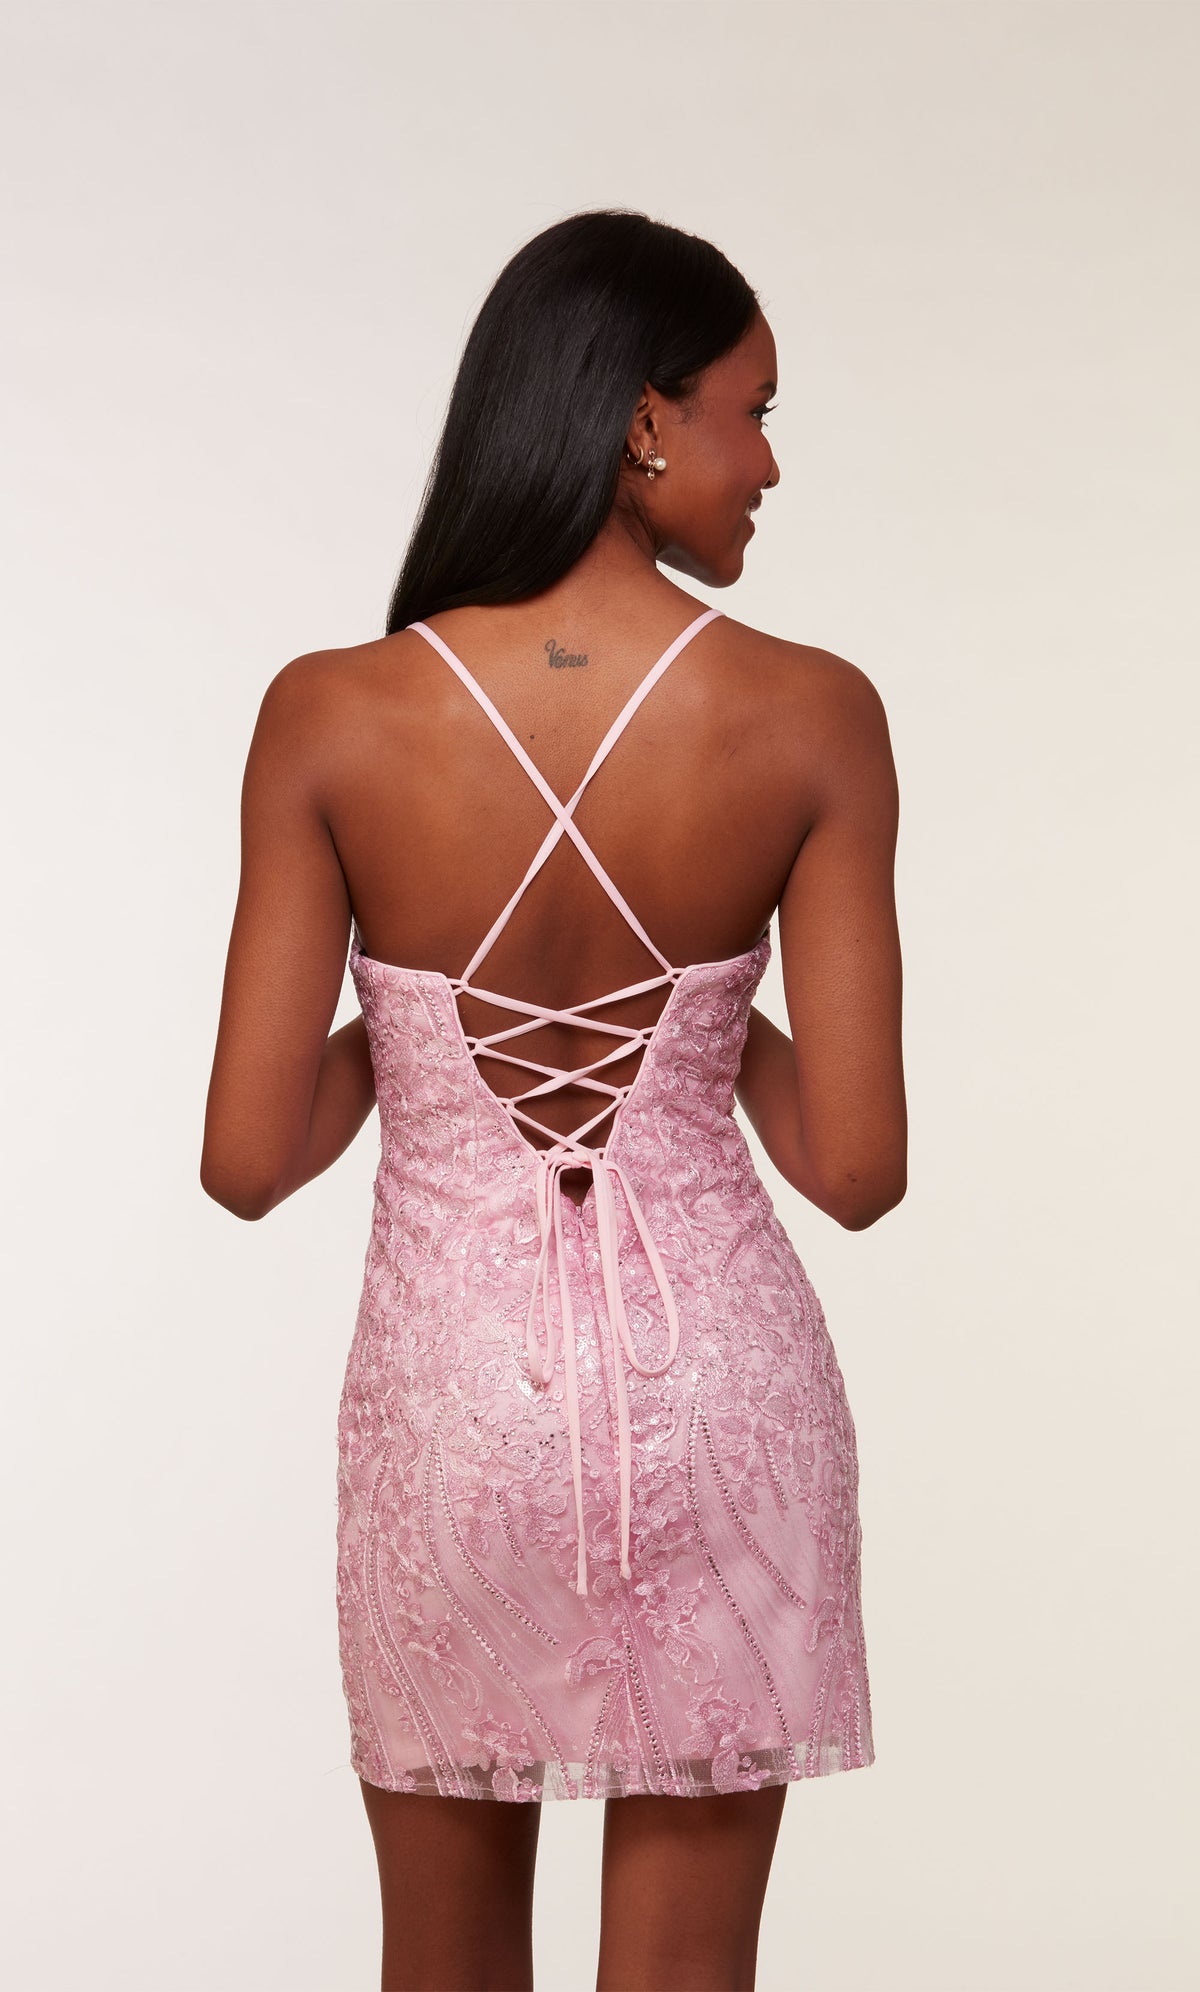 A pink, sleeveless short formal dress with a lace-up back and fitted silhouette. It features a pretty floral lace overlay and heat-set stones for a little sparkle.